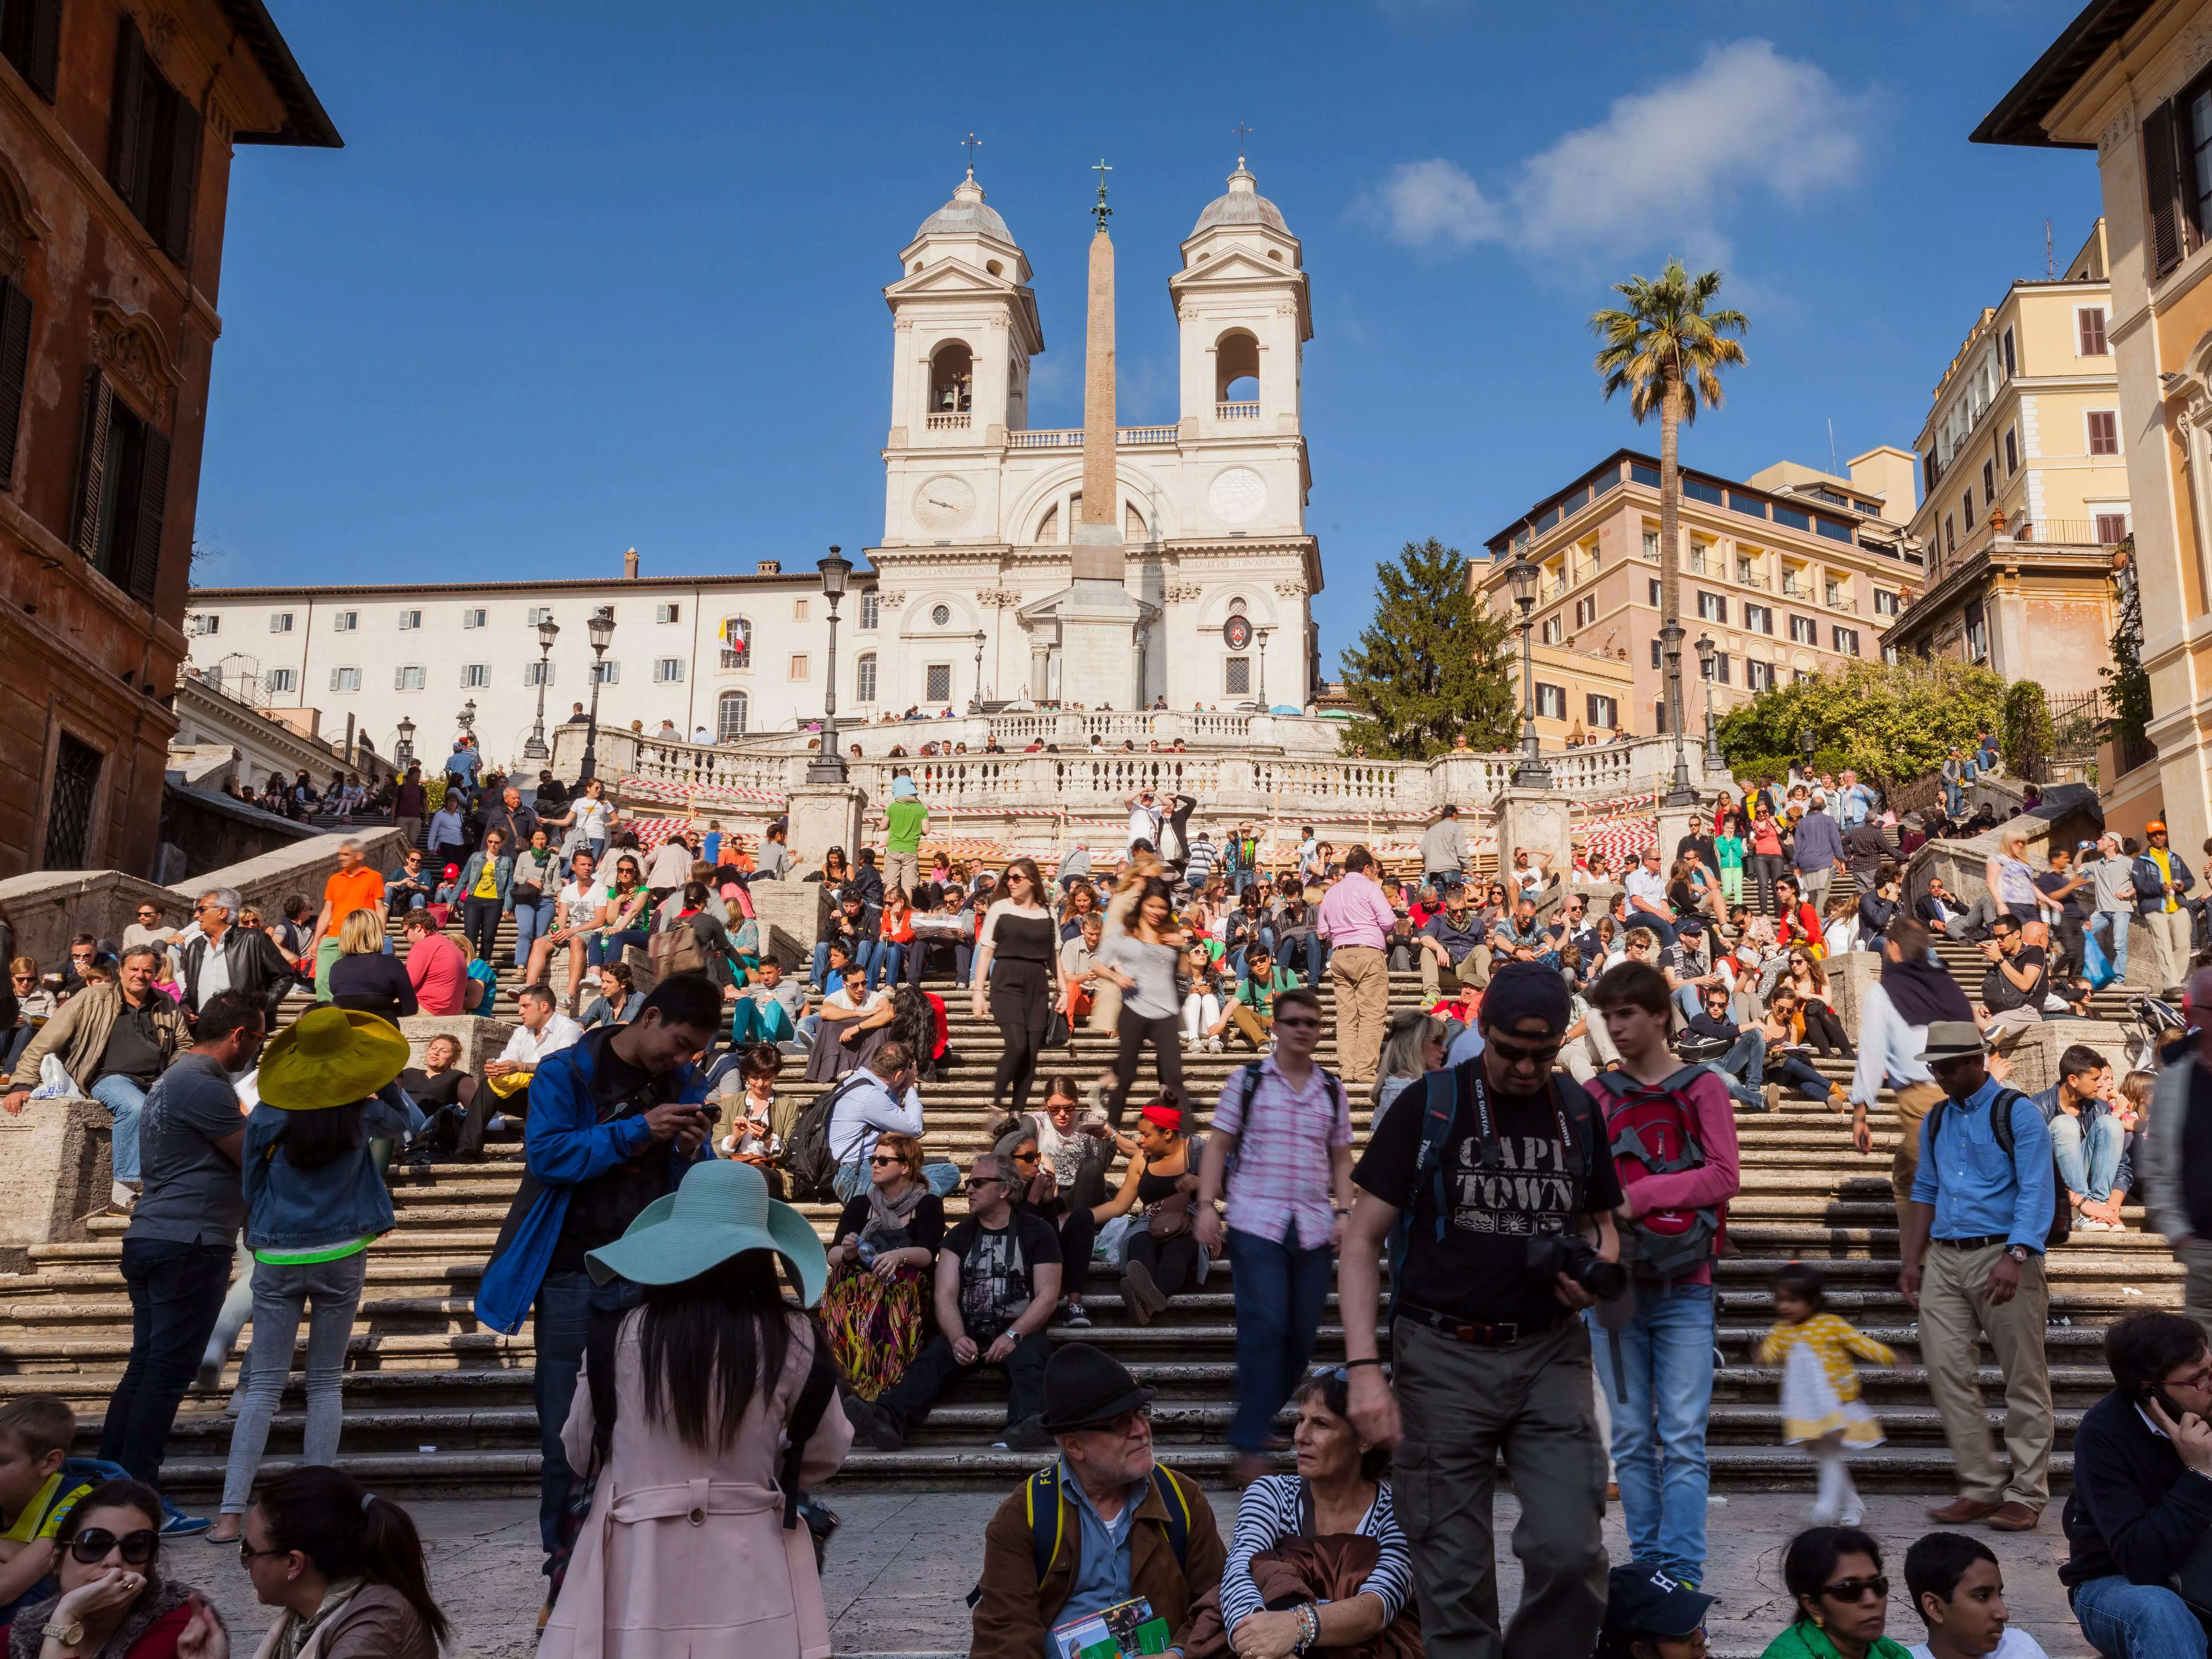 The Spanish Steps in Rome. They were built in 1725 and a popular tourist attraction. The church of Chiesa della Trinita dei Monti sits at the top.